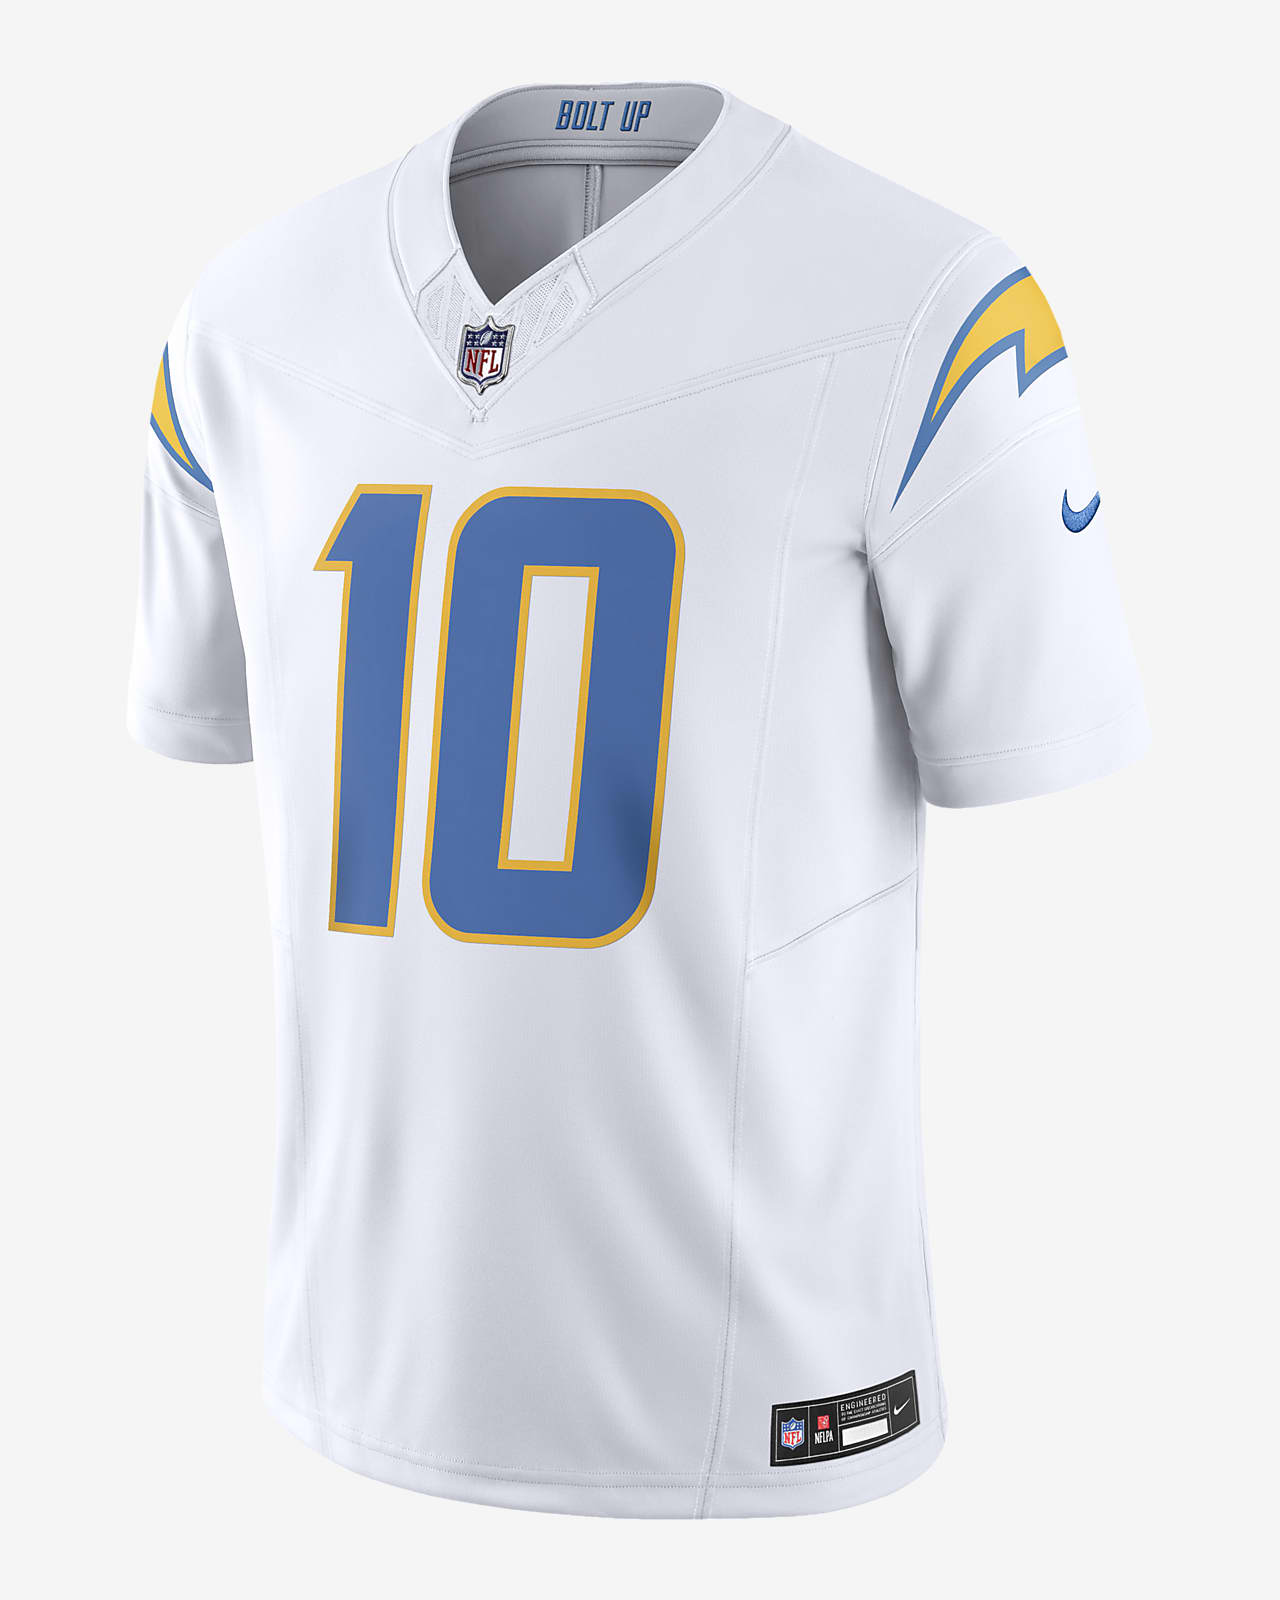 Justin Herbert Los Angeles Chargers Men's Nike Dri-FIT NFL Limited Football Jersey